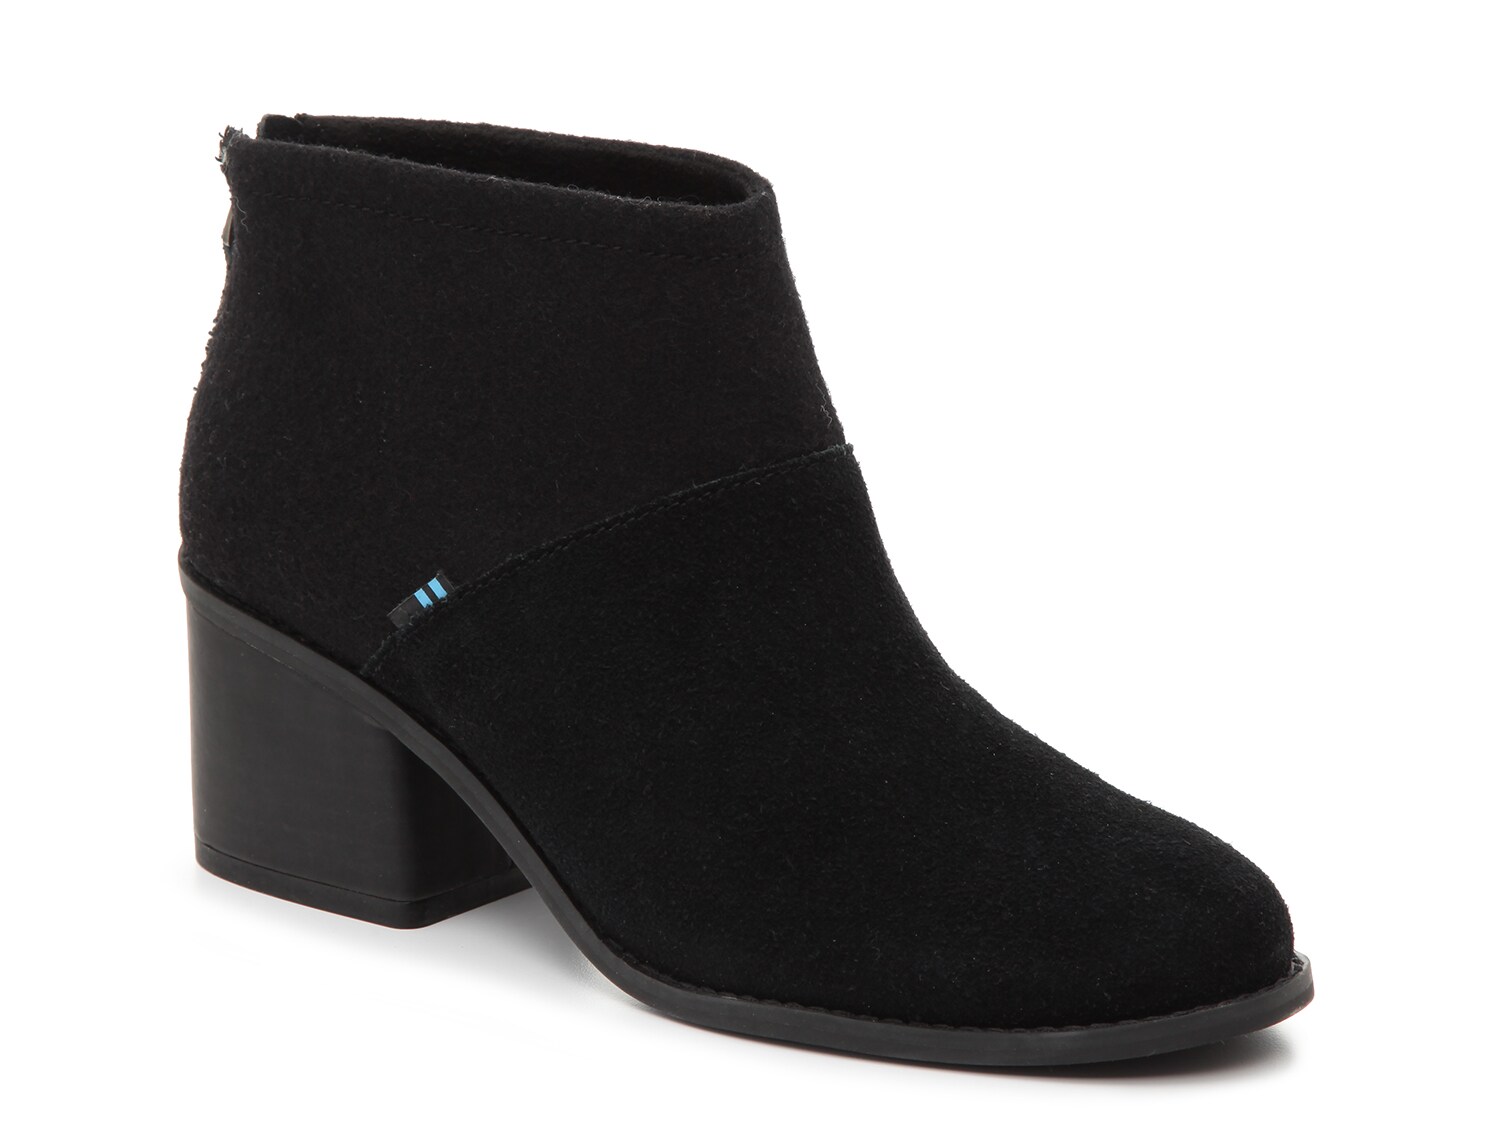 toms boots dsw